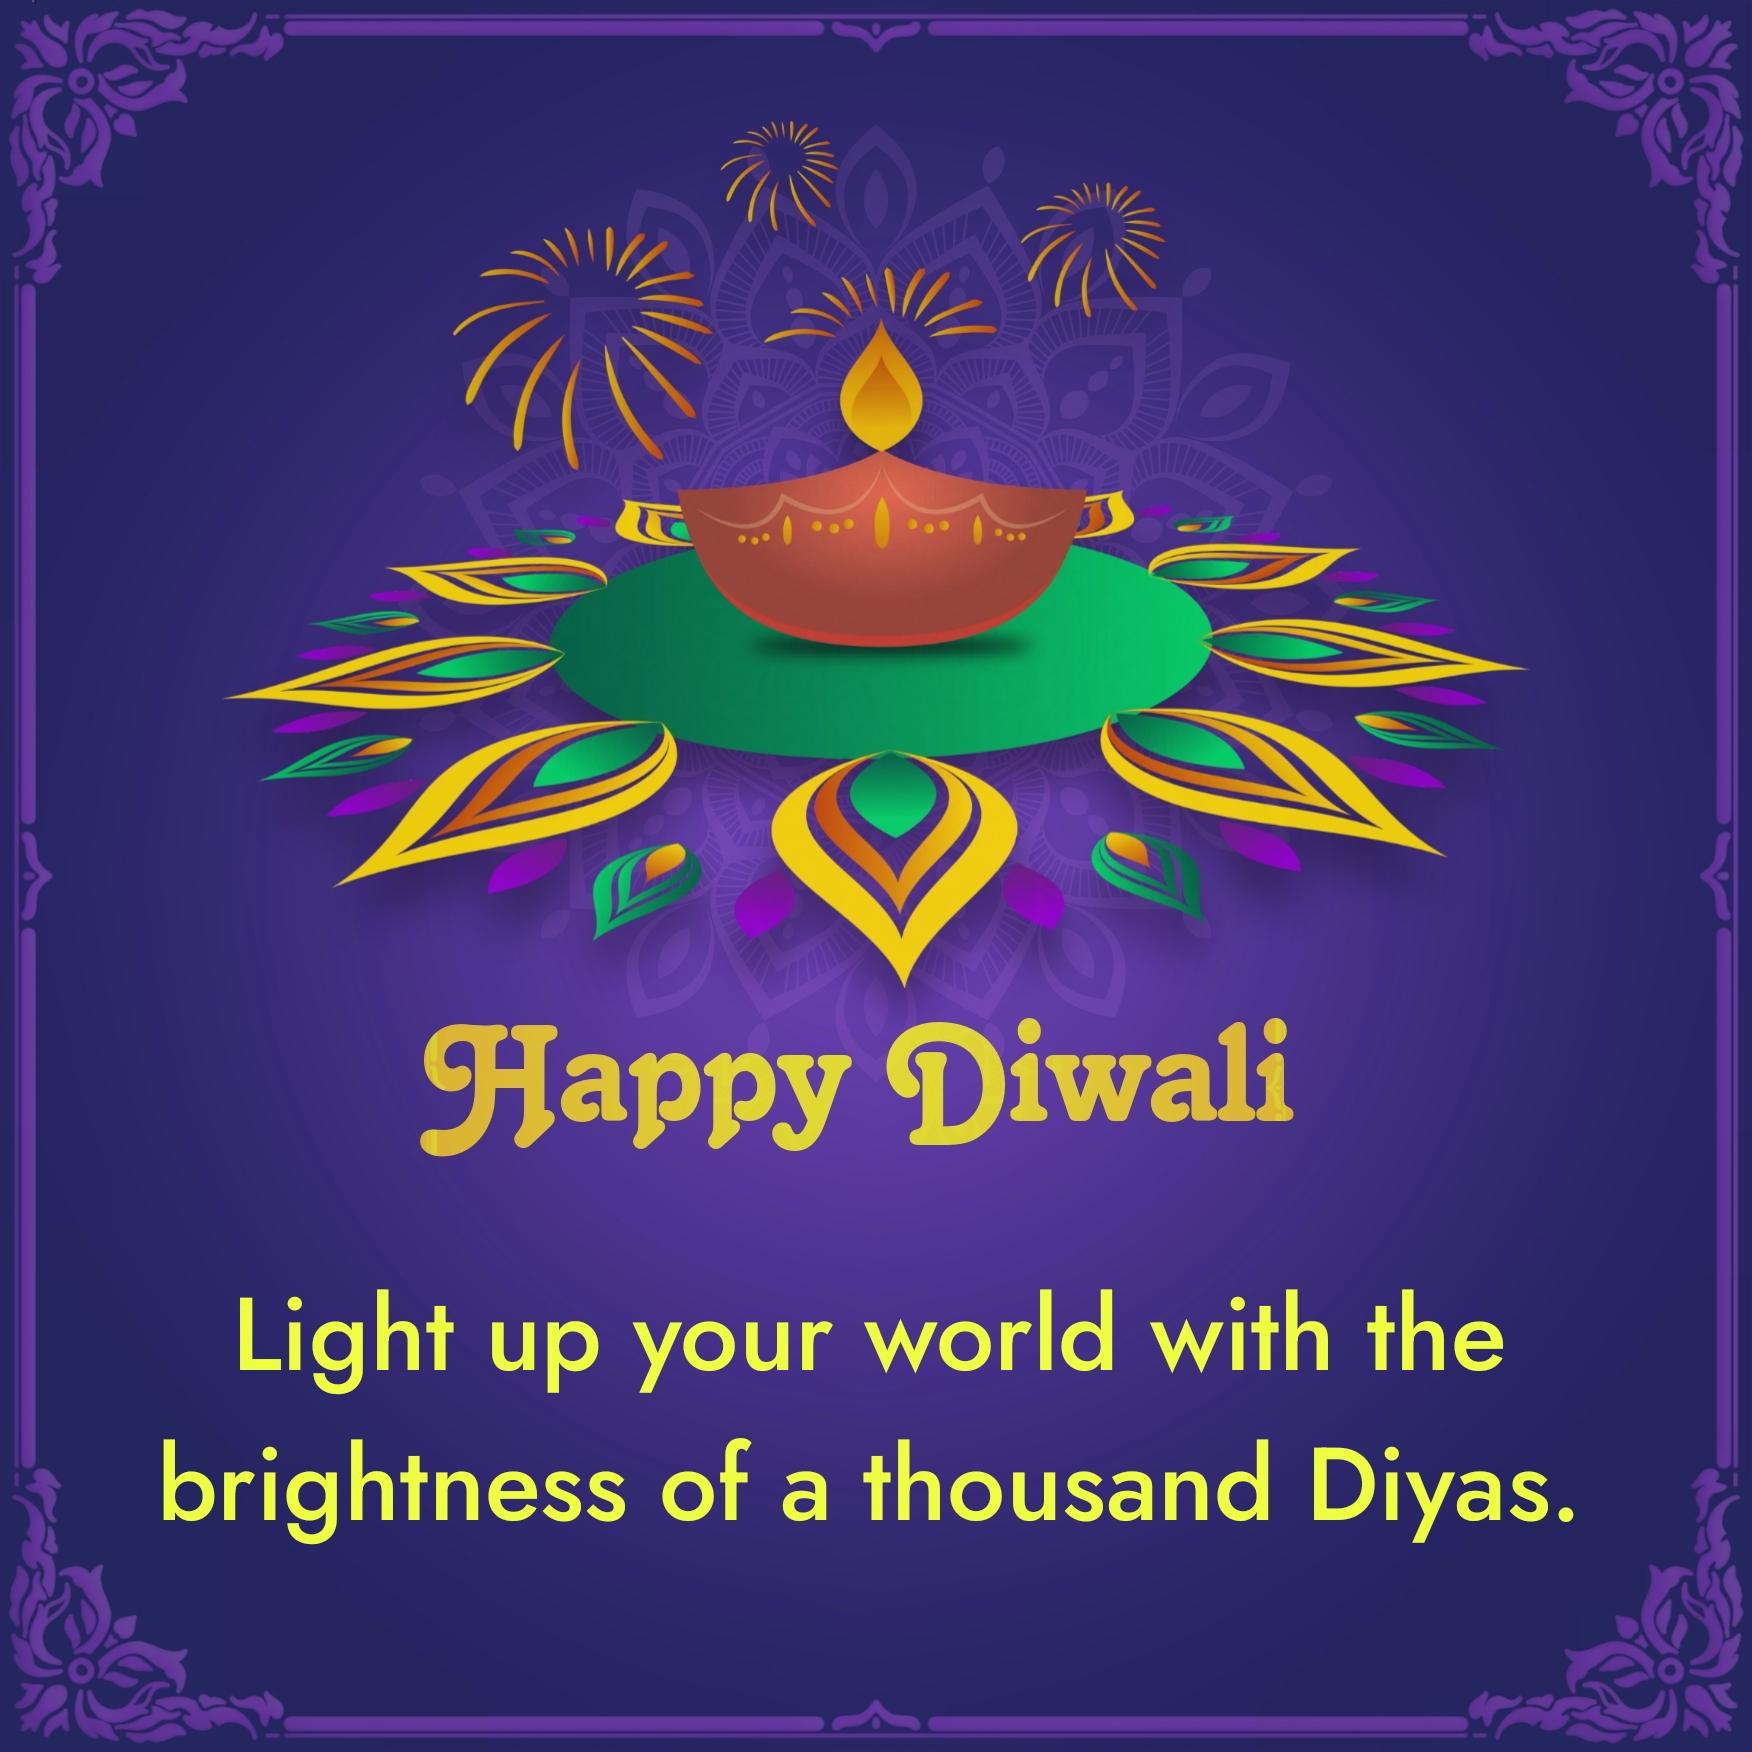 Light up your world with the brightness of a thousand Diyas